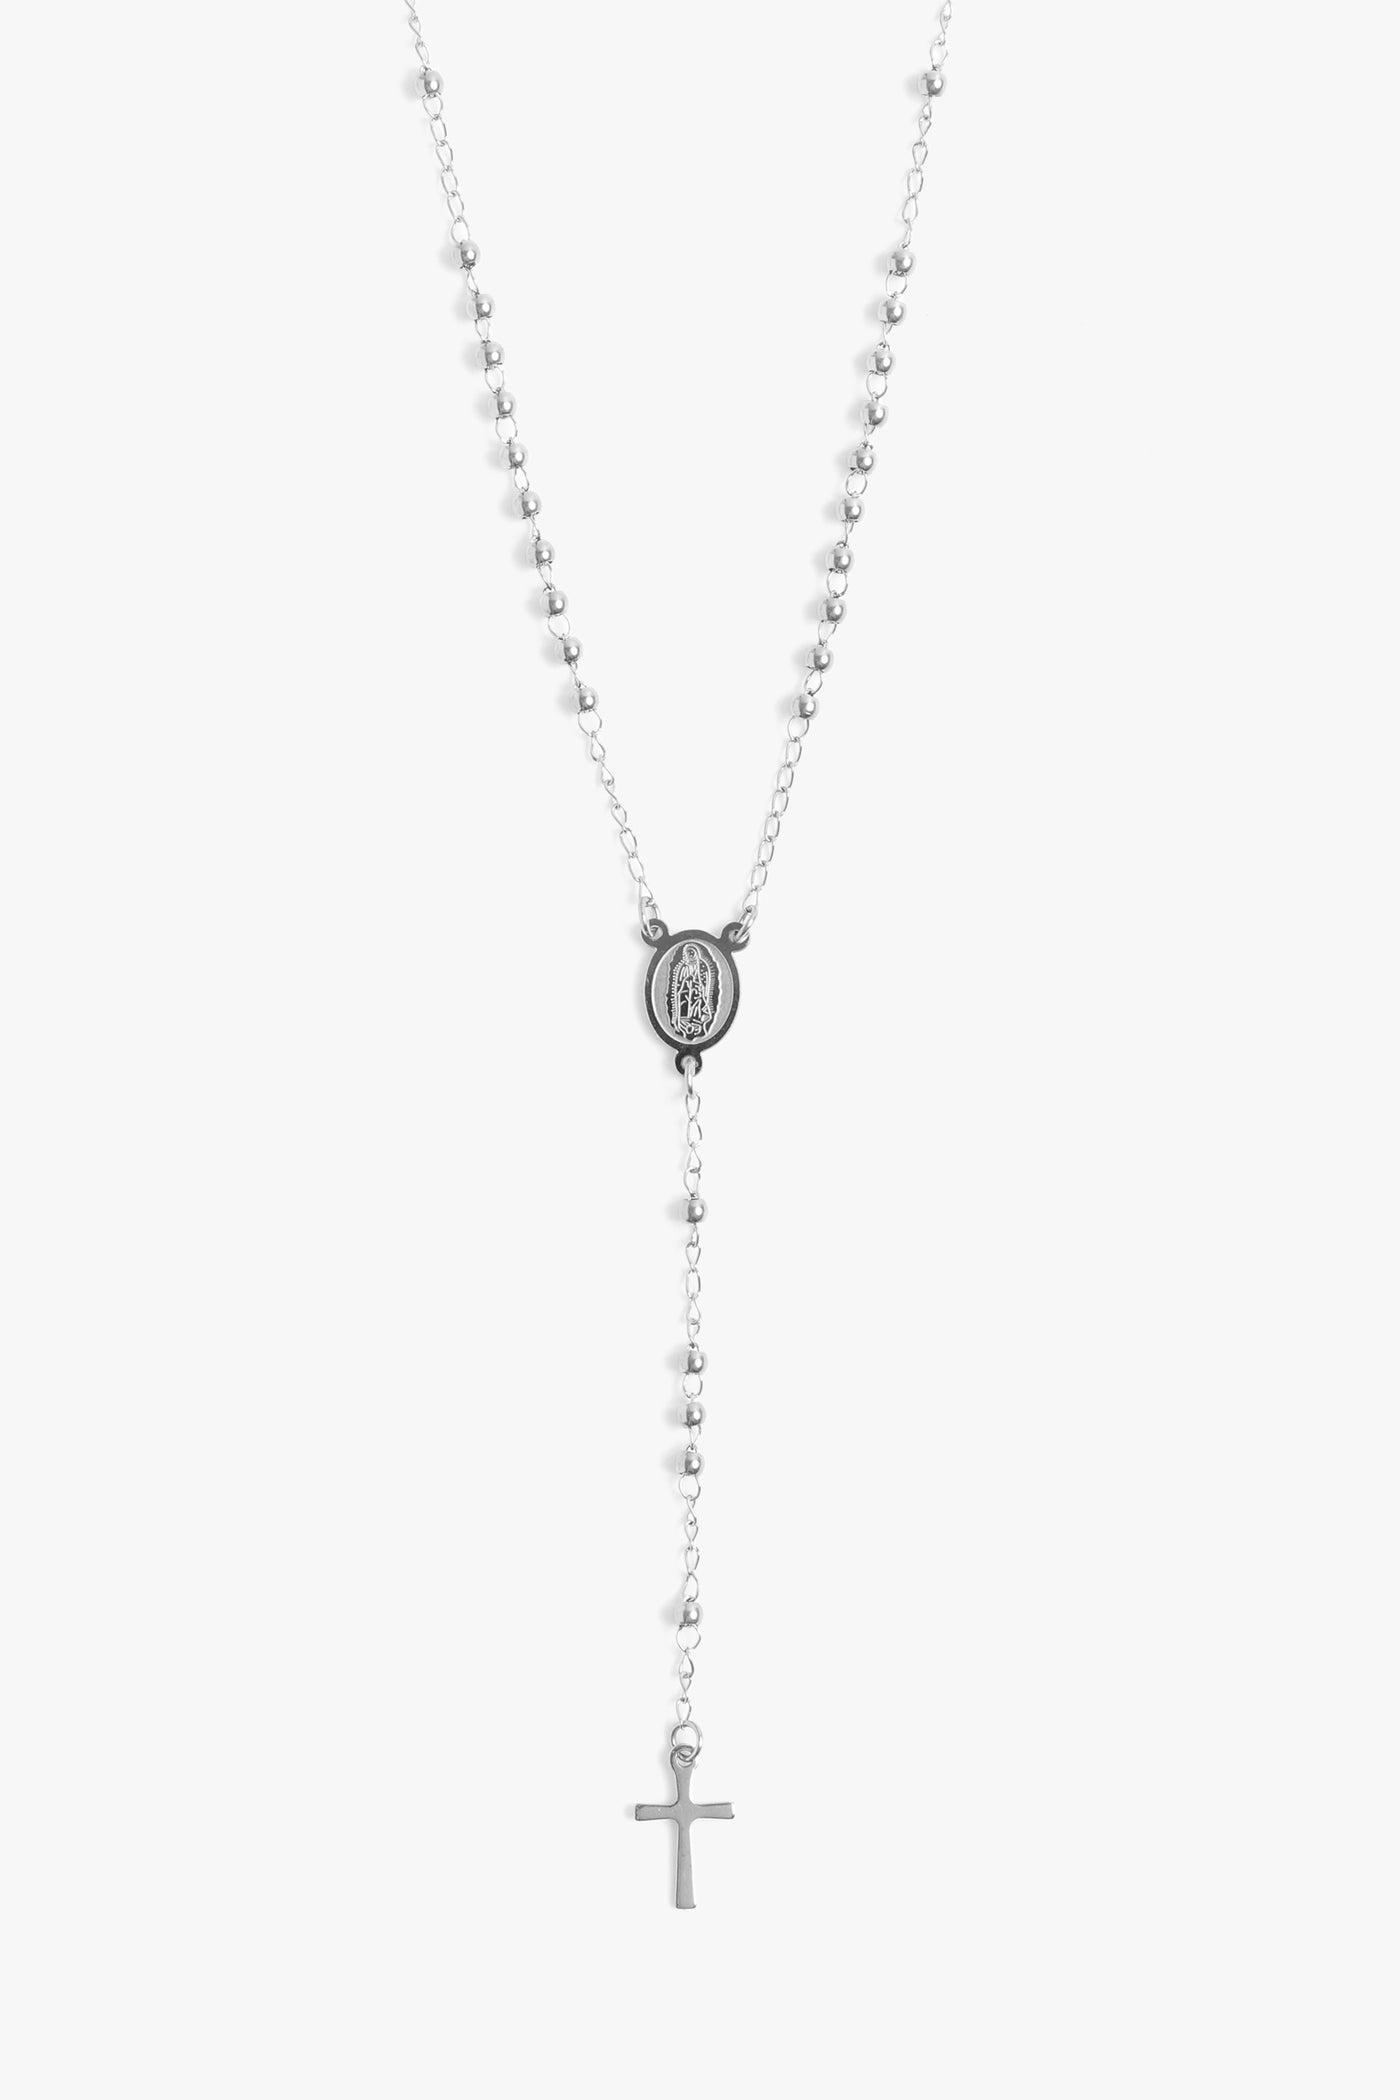 Marrin Costello Jewelry Ally Rosary functional for prayer beaded lariat with lobster clasp closure. Waterproof, sustainable, hypoallergenic. Polished stainless steel.